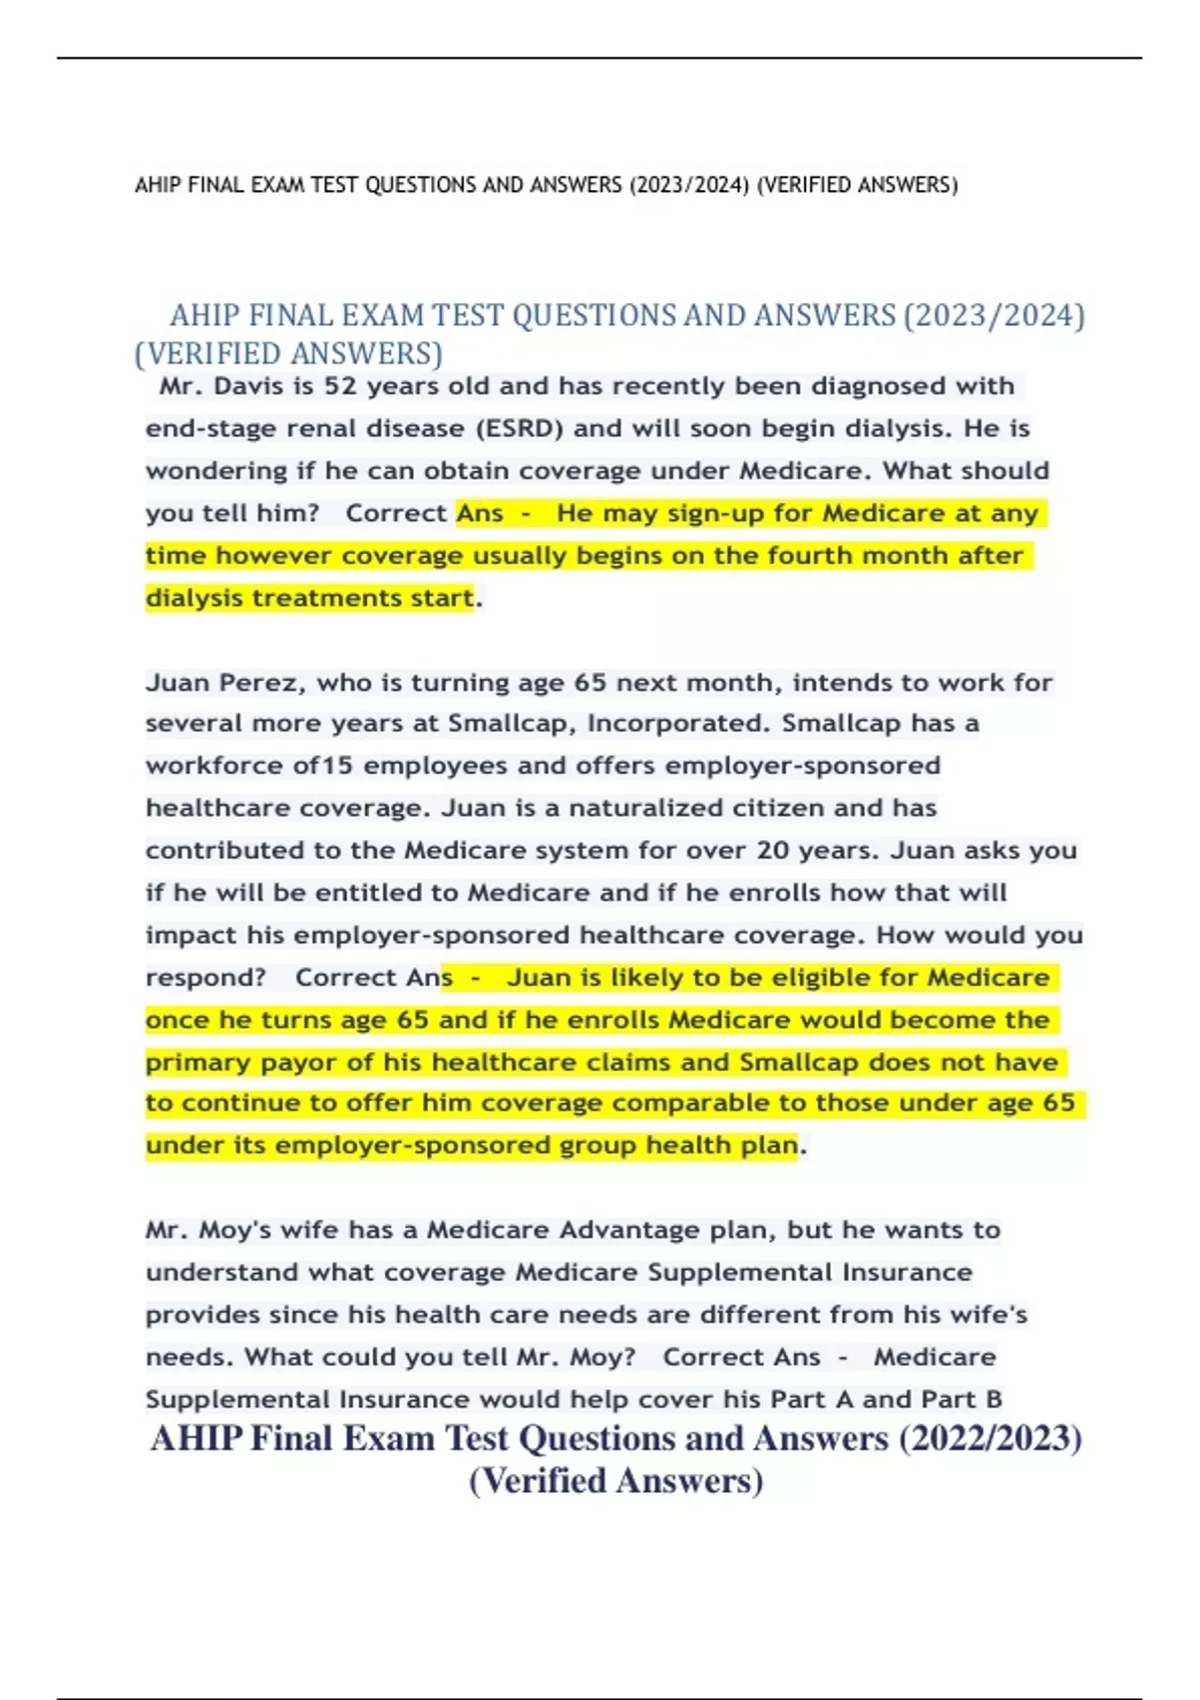 AHIP FINAL EXAM TEST QUESTIONS AND ANSWERS (2023/2024) (VERIFIED